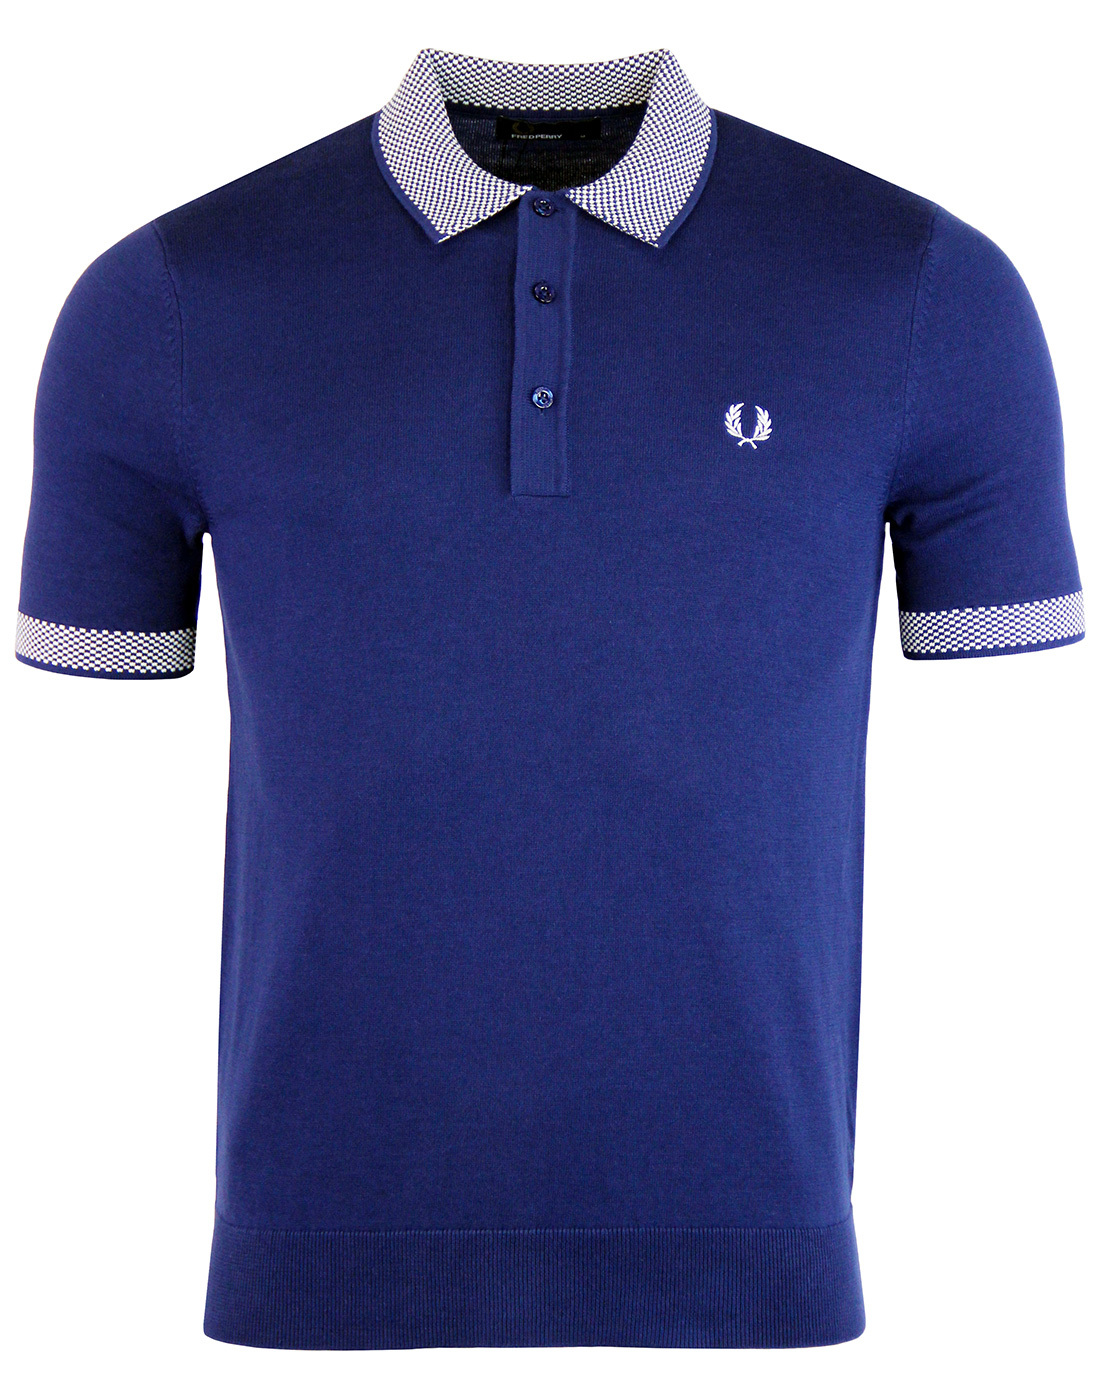 FRED PERRY Retro Mod Chequerboard Trim Knit Polo in French Navy